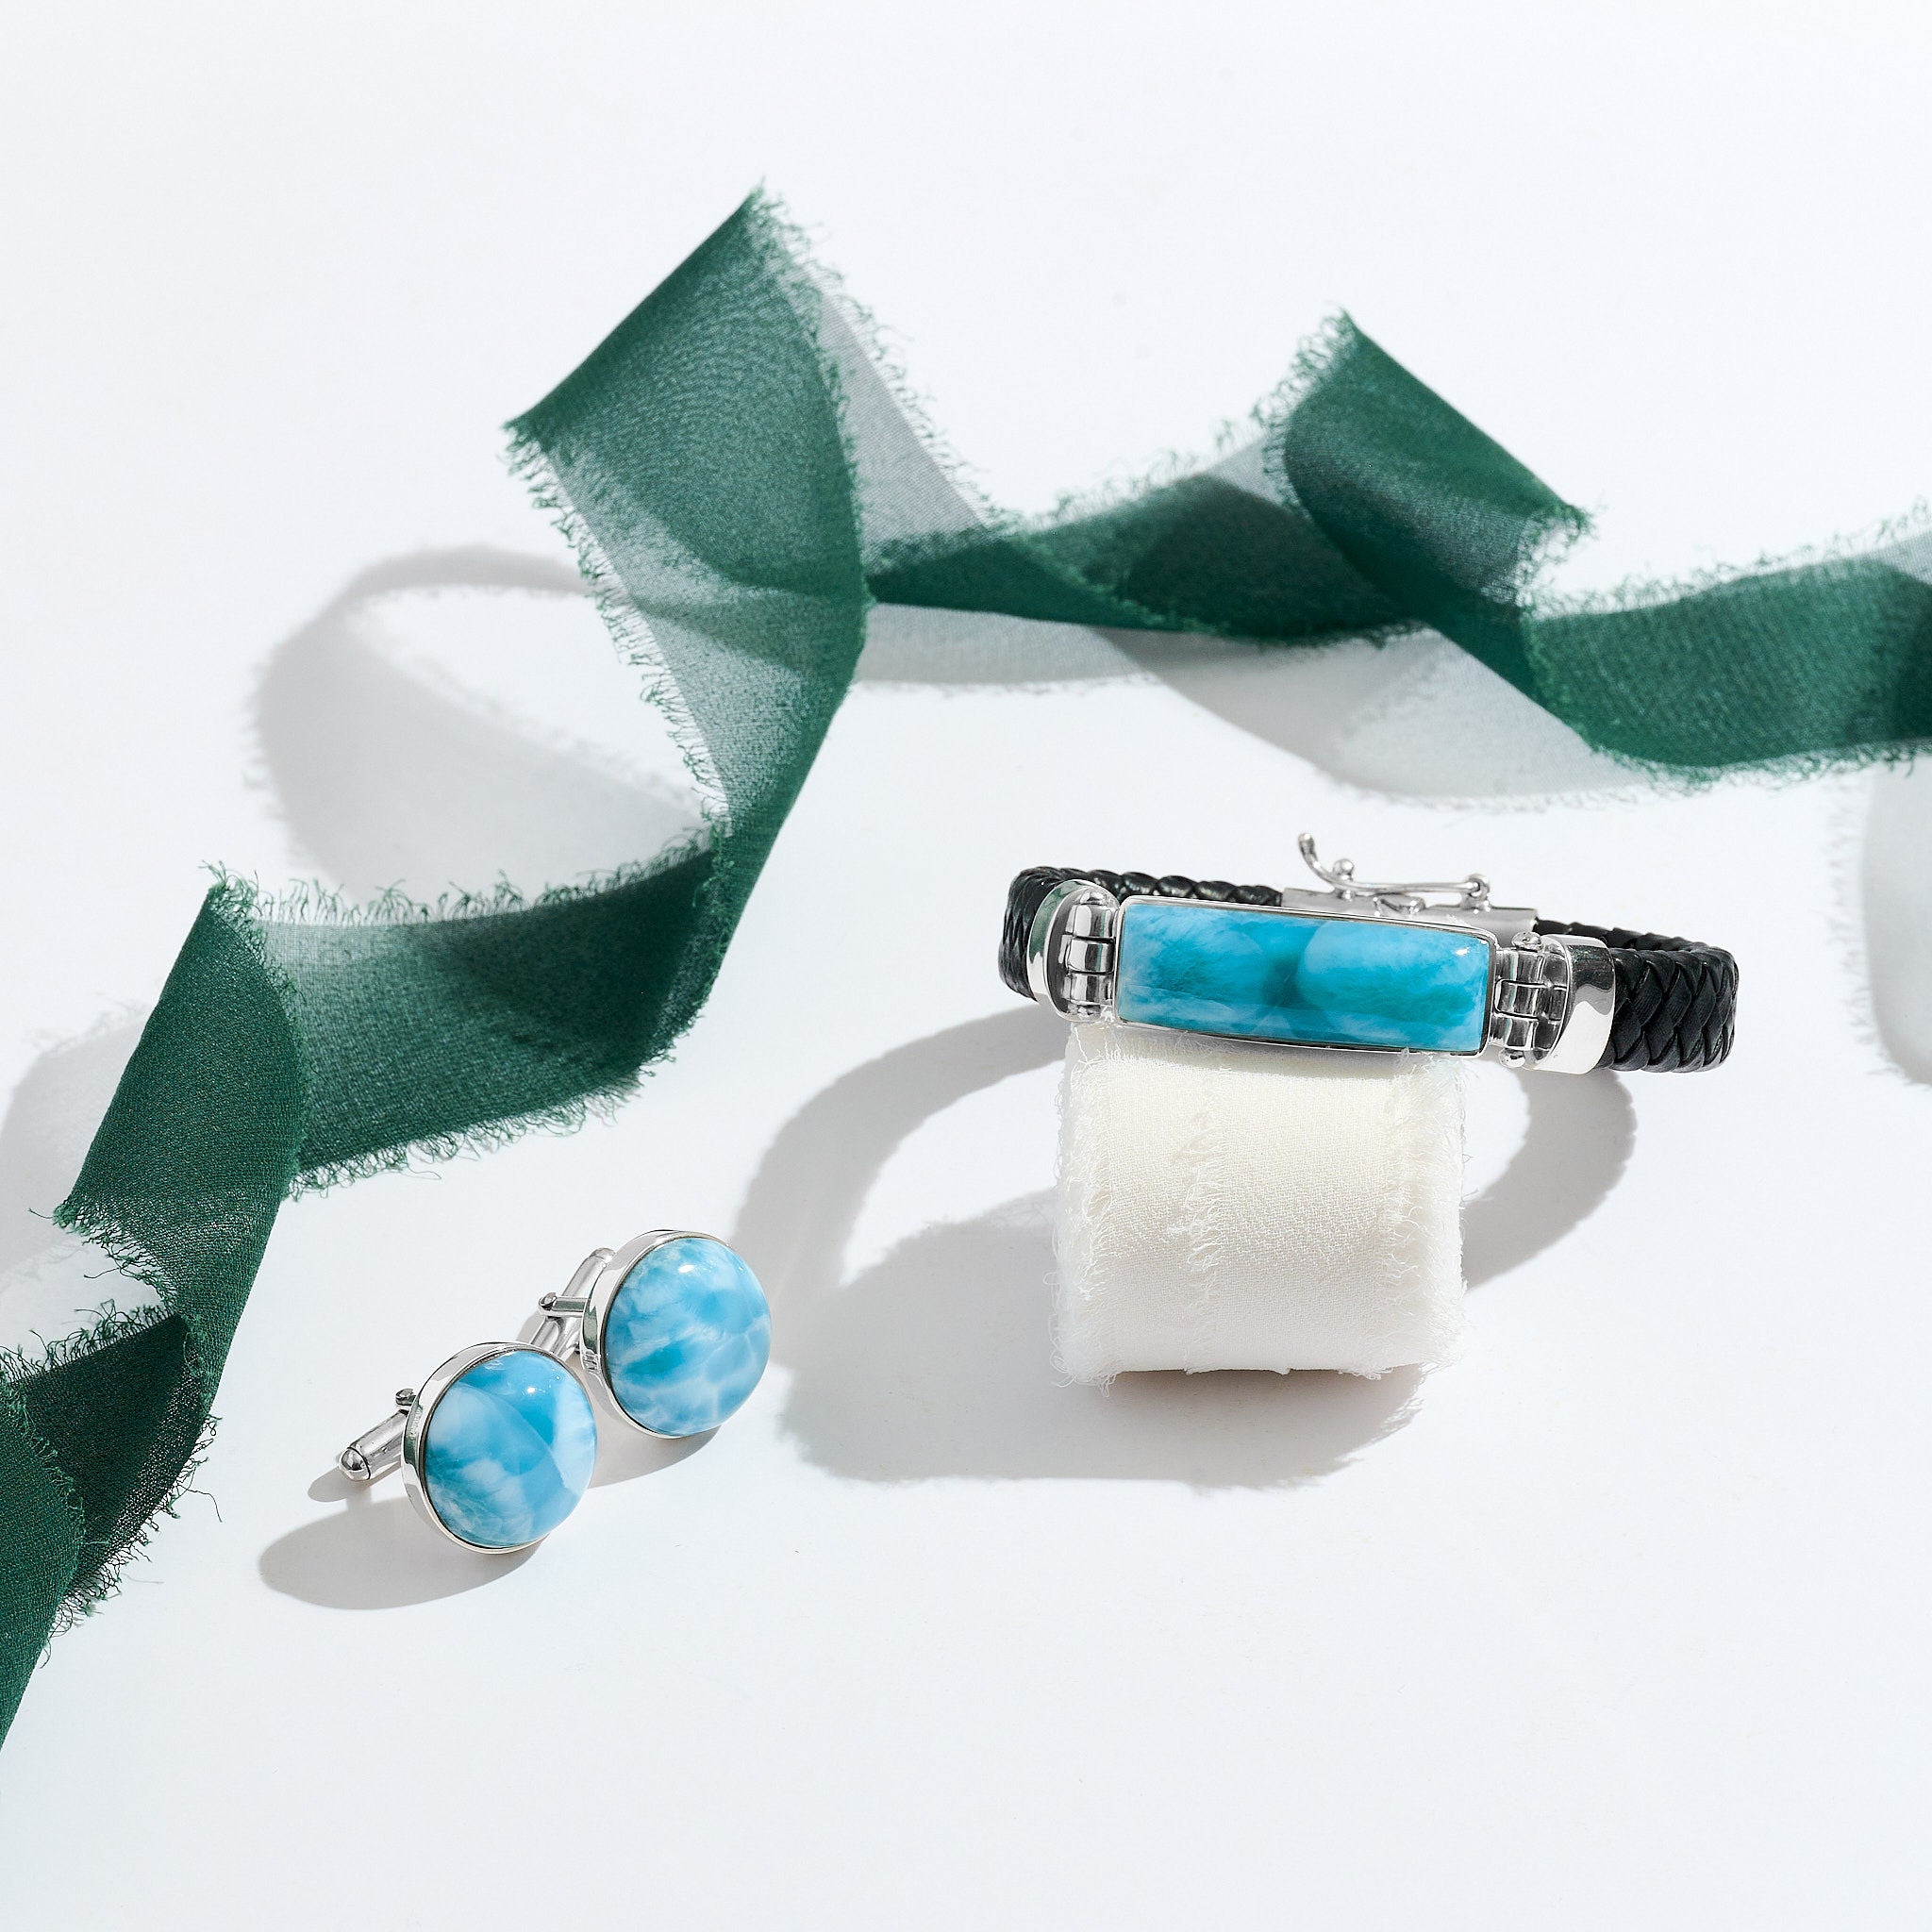 Luxury Beyond Compare – men's Larimar jewelry for the Discerning Fashion Connoisseur